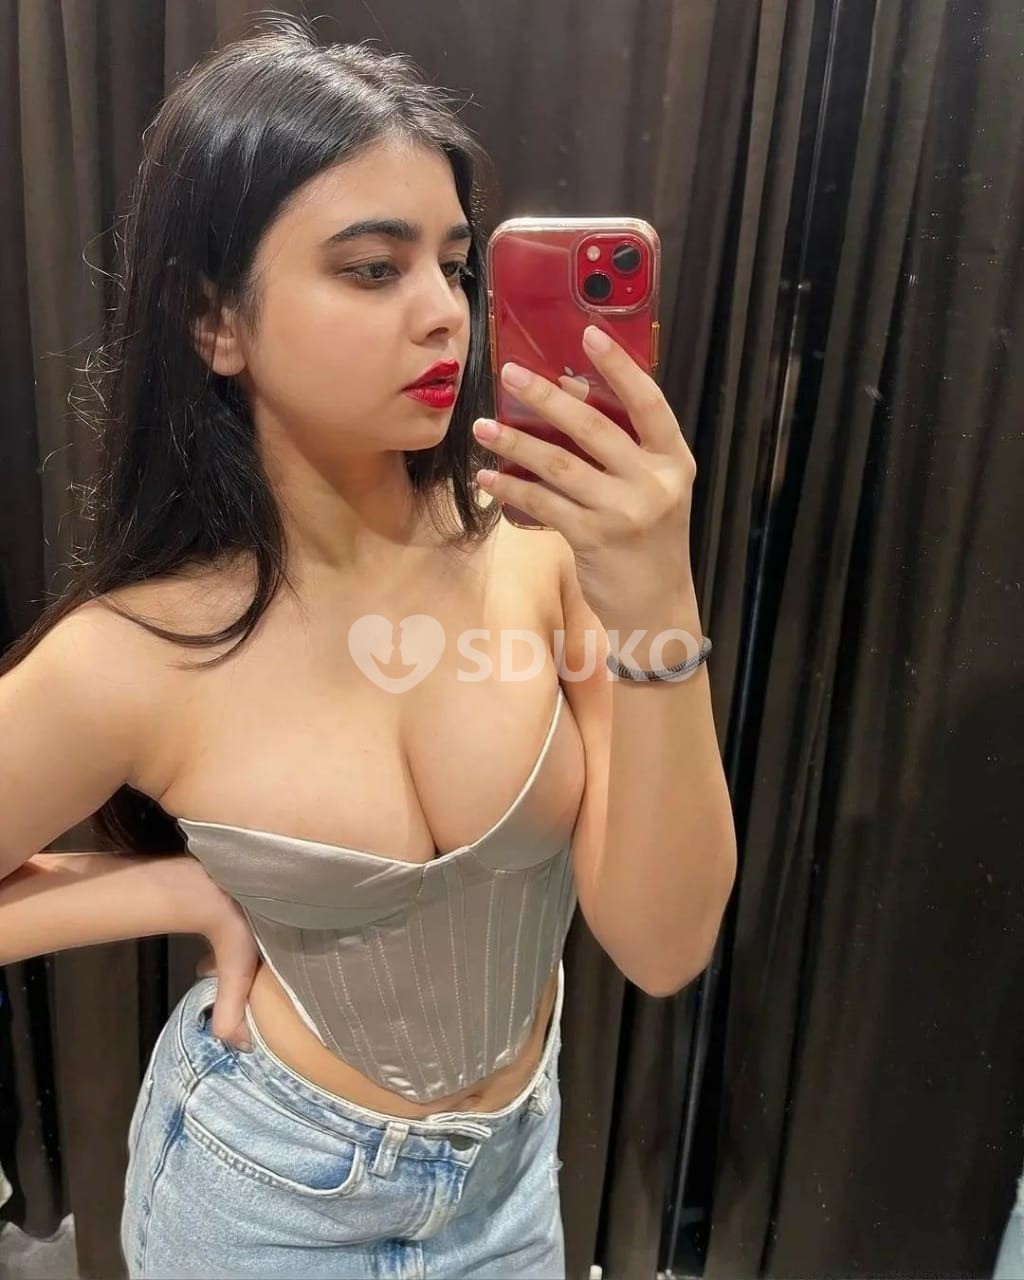 PAHARGANJ 🔐 $VIP TODAY LOW PRICE ESCORT 🥰SERVICE 100% SAFE AND SECURE ANYTIME CALL ME 24 X 7 SERVICE AVAILABLE 100